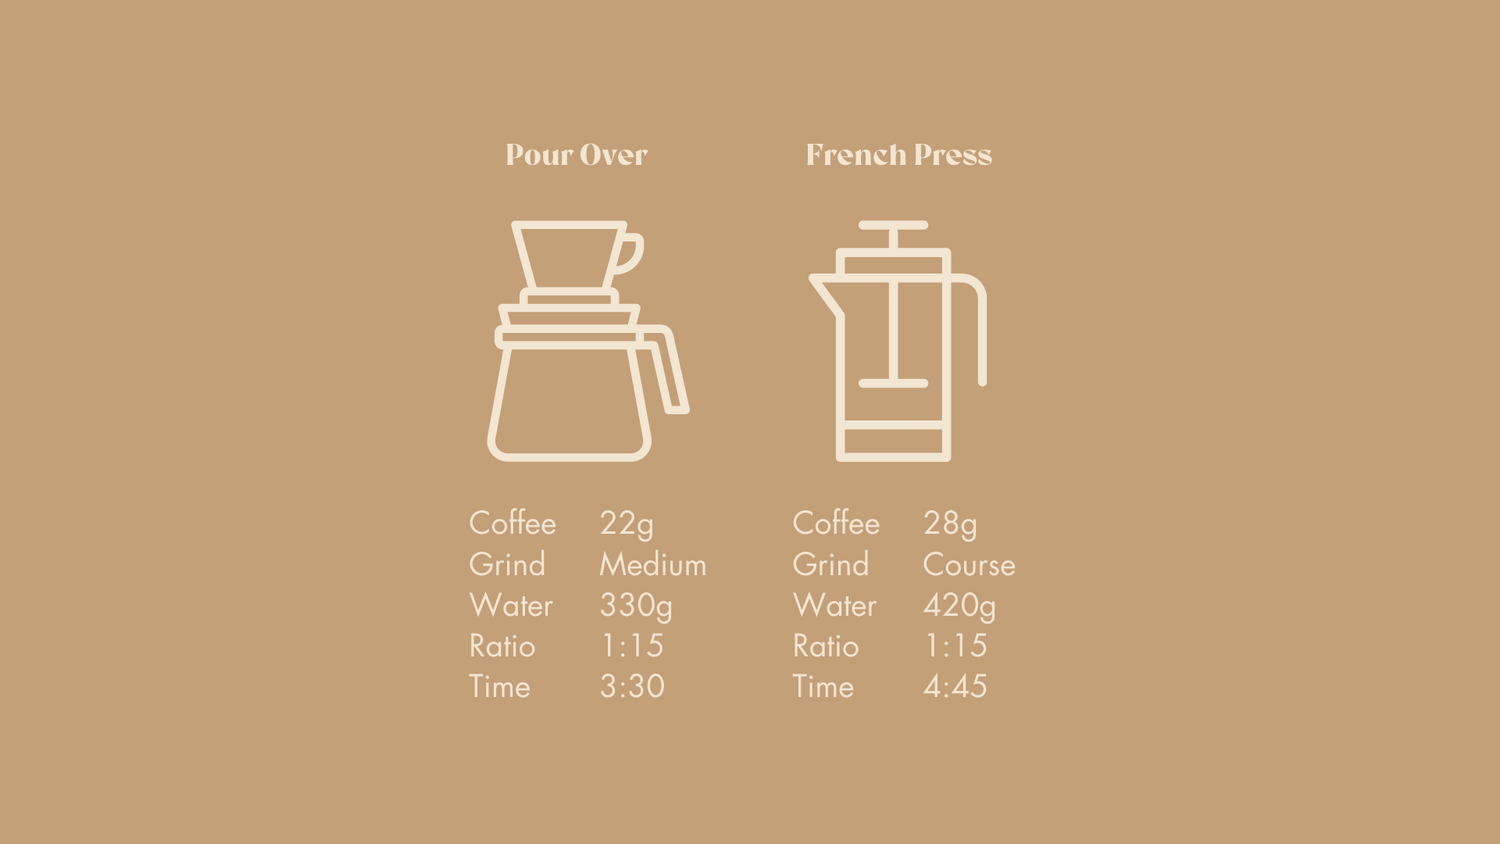 Brewing instructions for Pour over and French Press